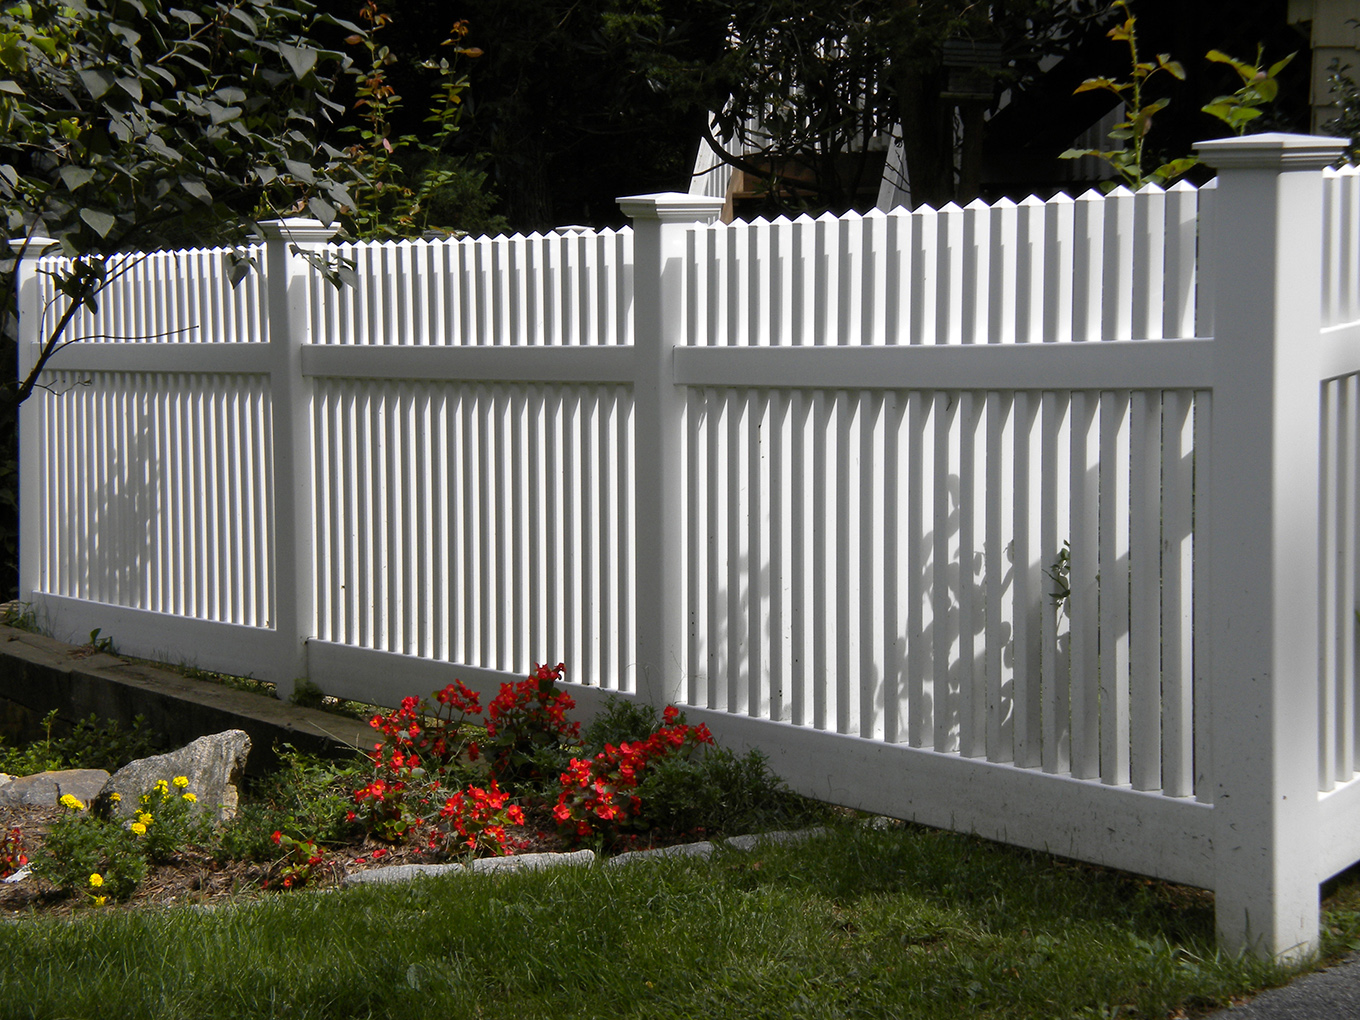 Danbury Connecticut residential fencing company